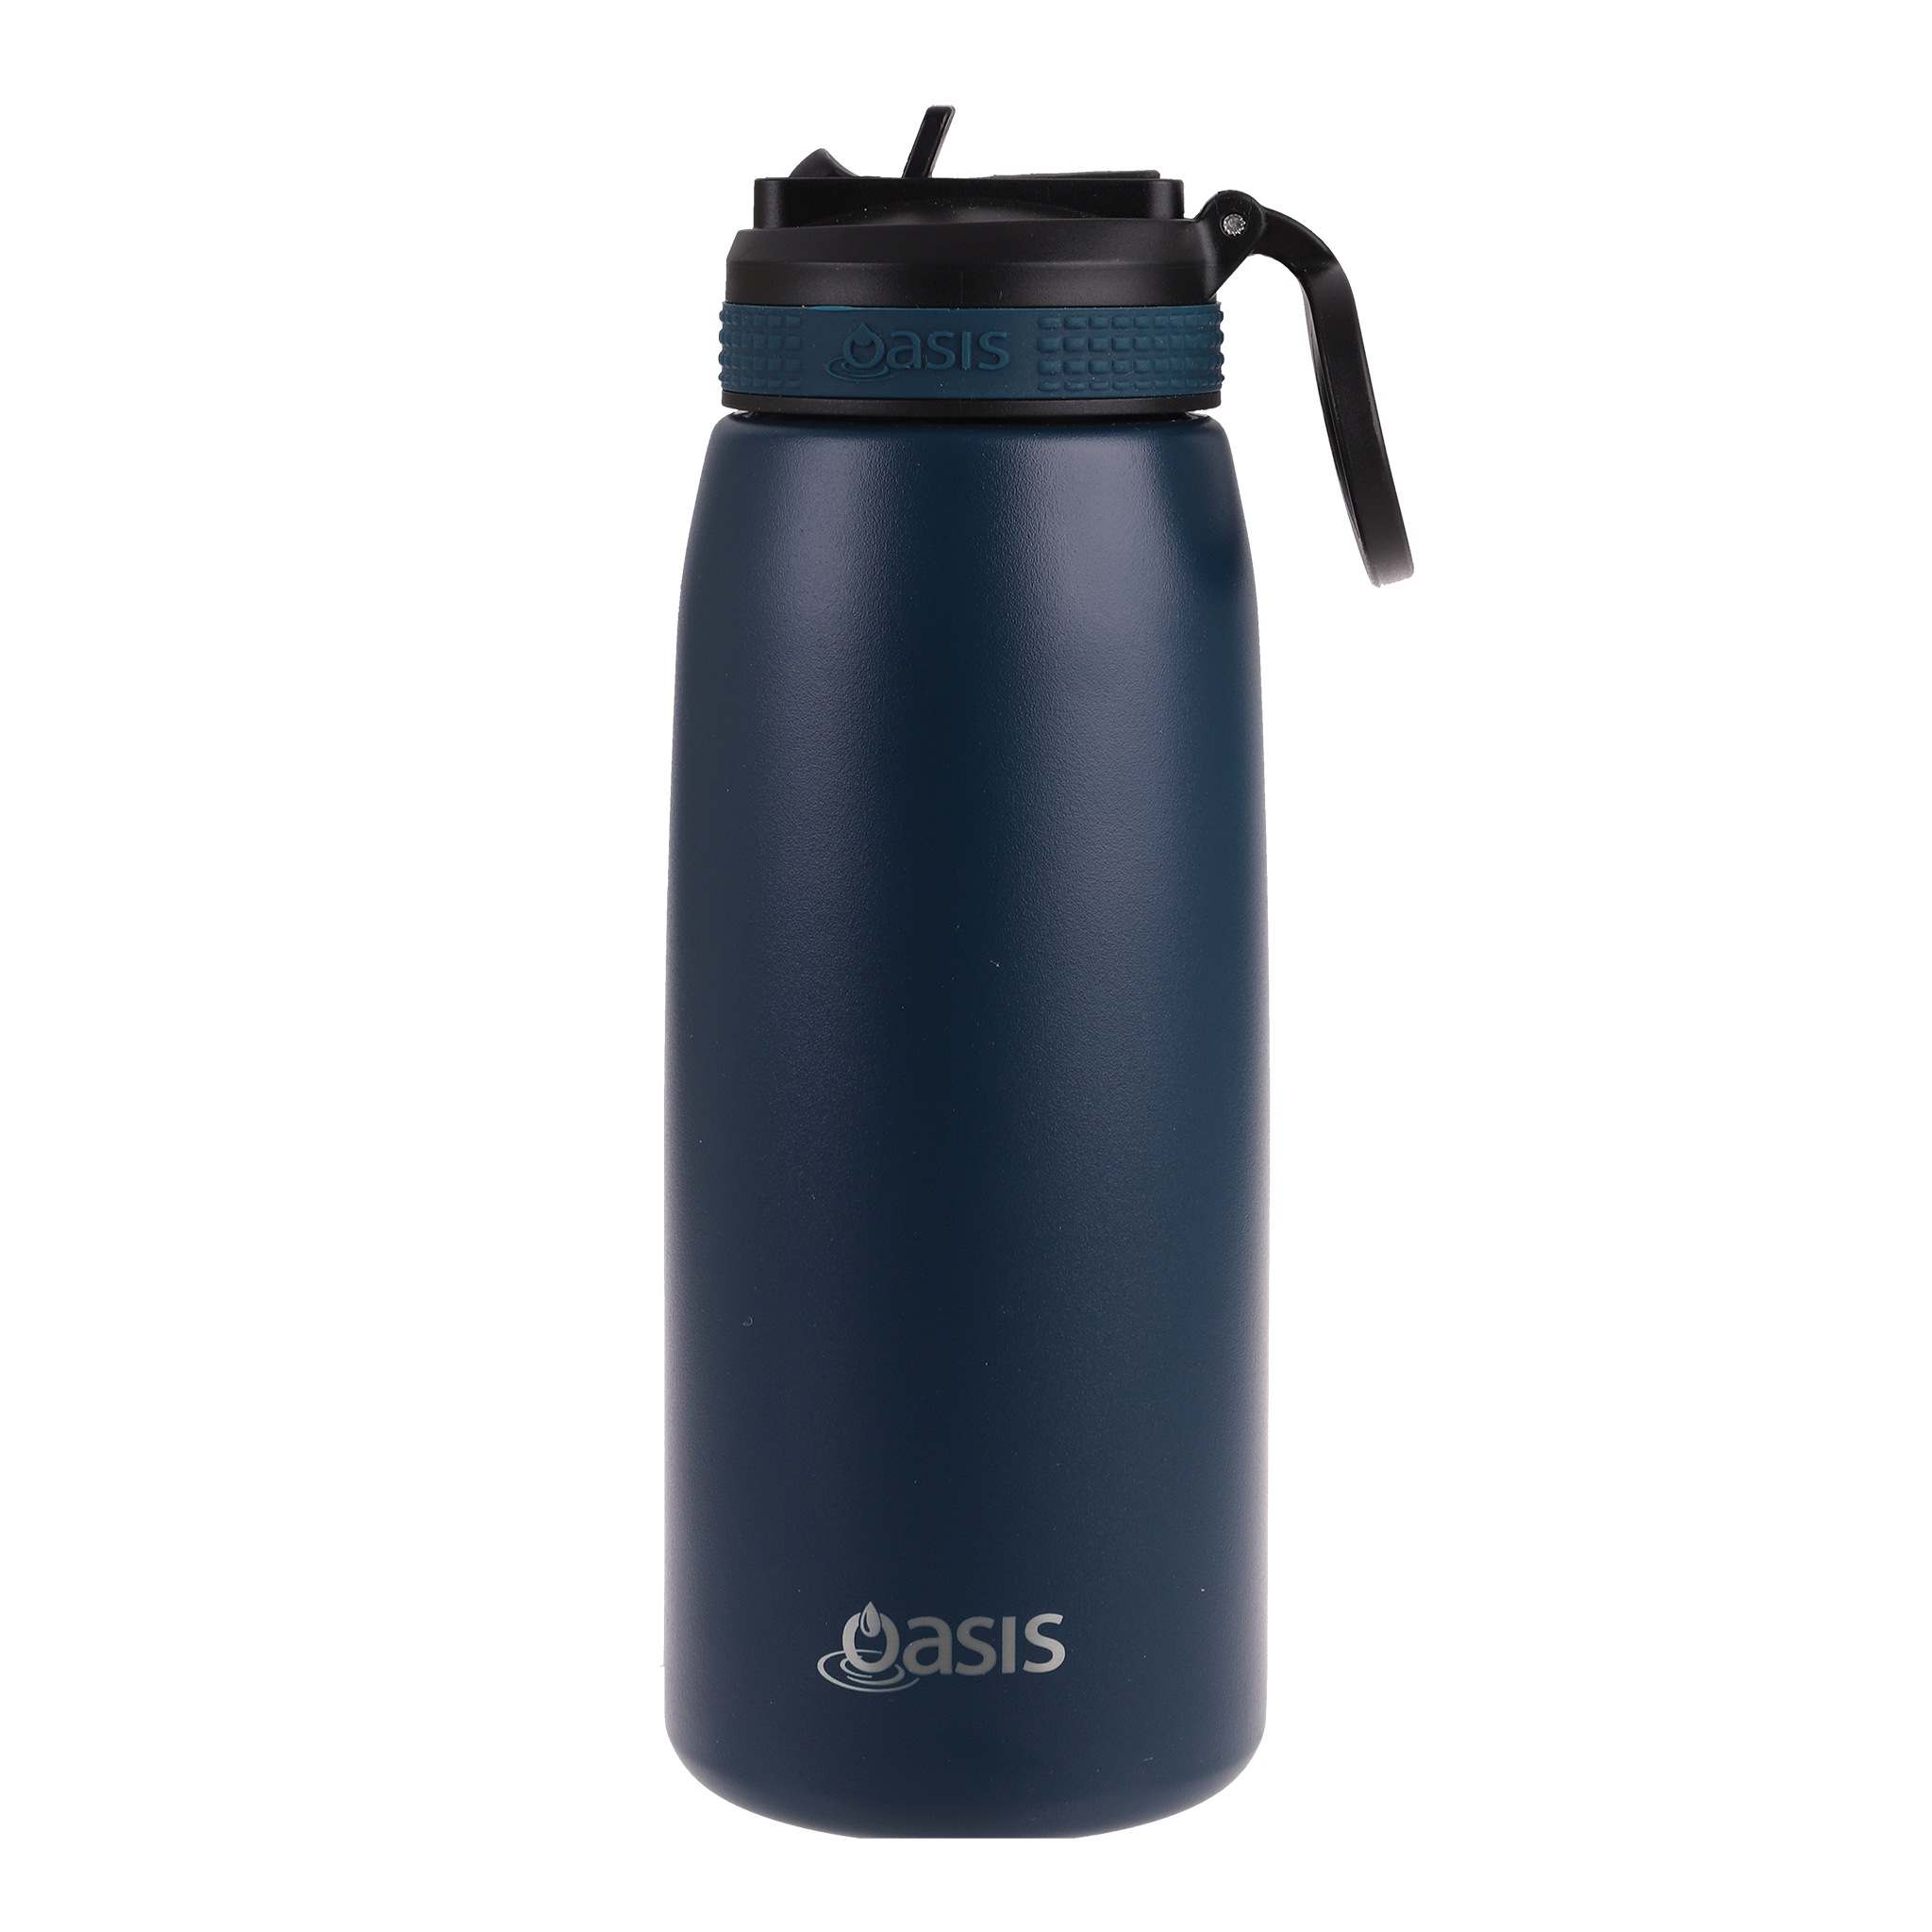 Oasis Stainless Steel Double Wall Insulated Sports Bottle with Sipper 780ml Navy